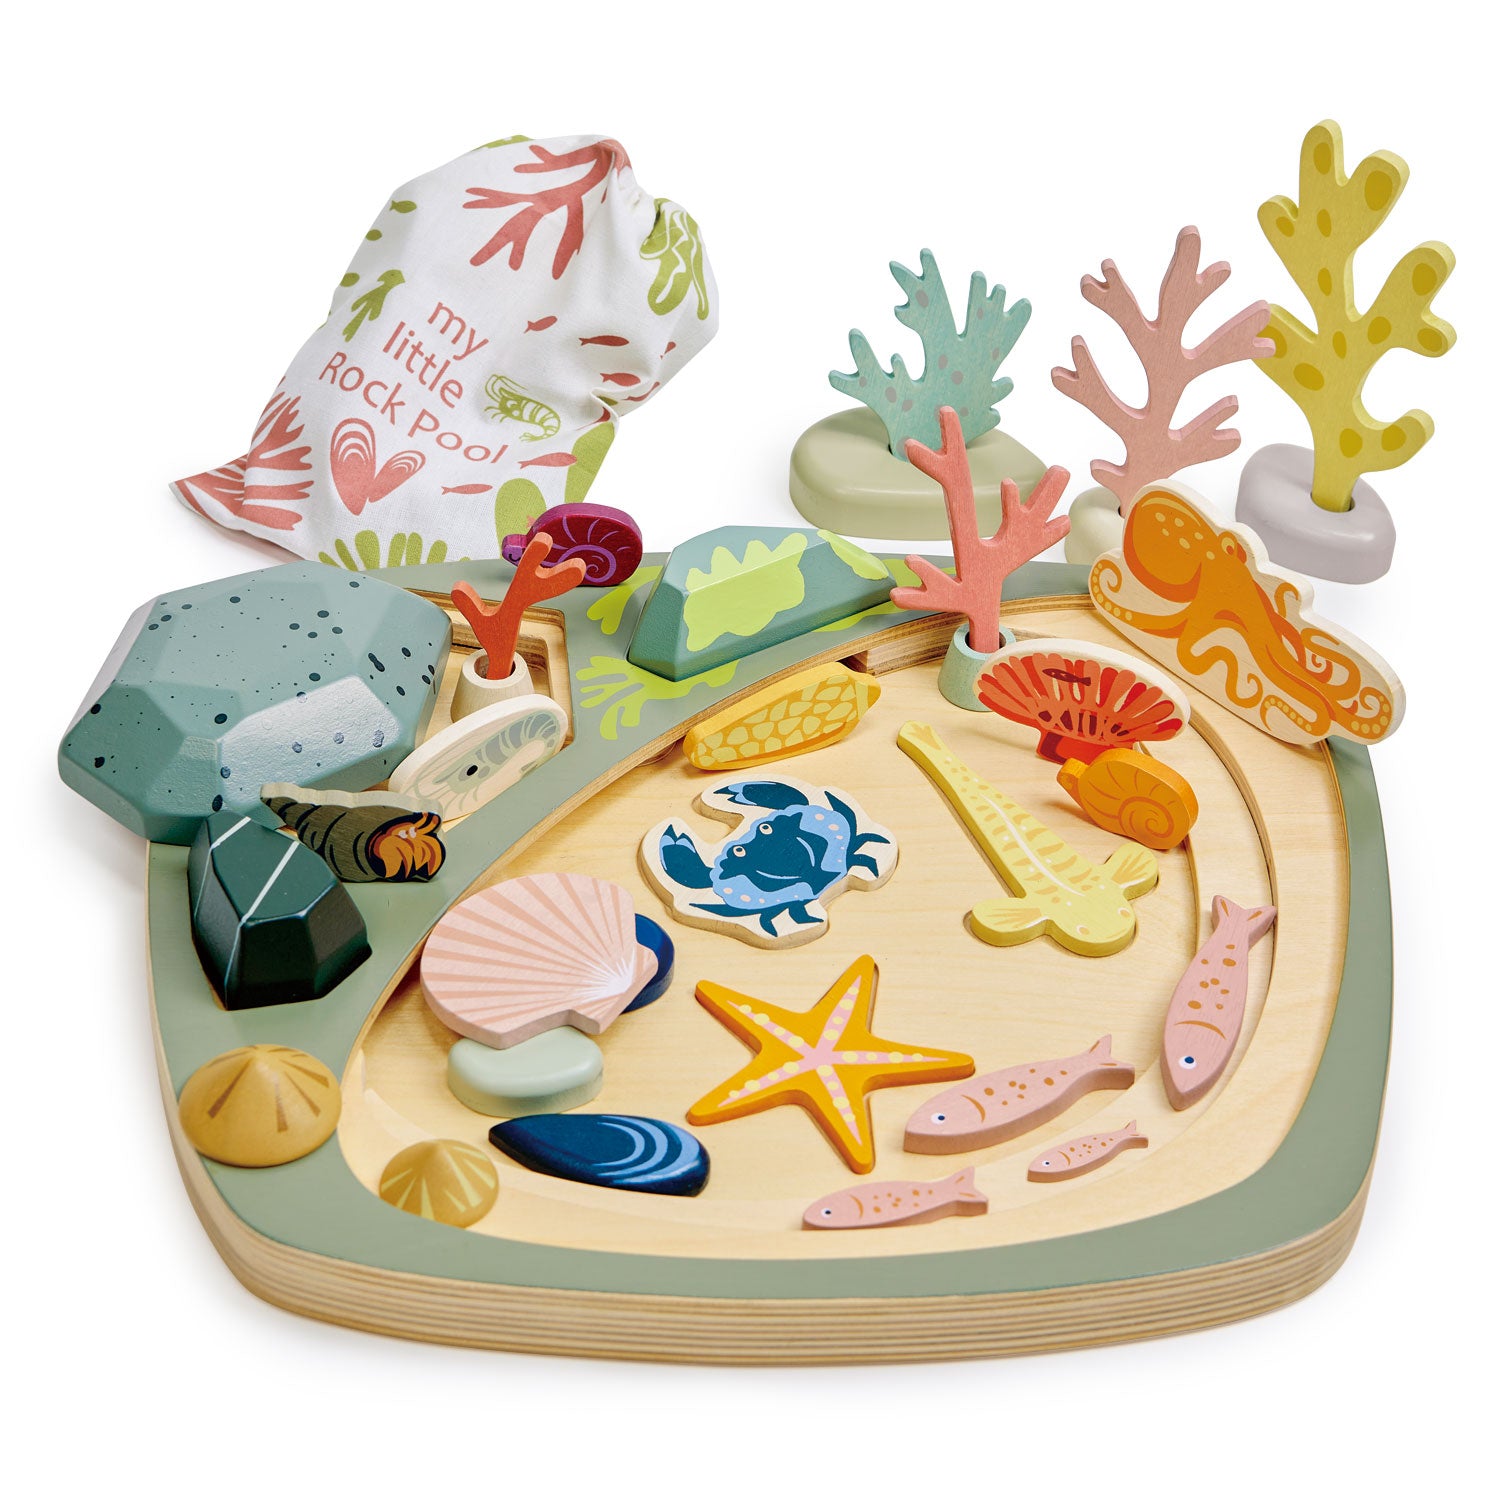 <p>Discover the many delights hidden inside our rock pool. 3 large rocks cover cavities where small fish and shrimp can hide. 3 shapes in the base layer allow shape-sorting activity. Rocks with holes can create a 3D seaweed forest. Set includes;</p>
<p>8 rocks, an octopus, starfish, crab, mud hopper, family of 4 fish, 2 snails, a sea shell, a hermit crab, 2 barnacles, a shrimp, a mussel, a scollop, a sea anemone, 2 limpets, 5 seaweed fronds, all contained in a pretty printed bag.</p>
<p>Age range: 3 years +  </p>
<p>Product size: 13.78 x 11.81 x 1.97”  </p>
<p>Weight: 2.99 Ibs</p>
<p><a href="https://www.dropbox.com/s/xfdfr17igs0r9ef/TL8486%20My%20Little%20Rock%20Pool%20Printable.pdf?dl=0"><strong>Download My Little Rock Pool Printable</strong></a></p>
